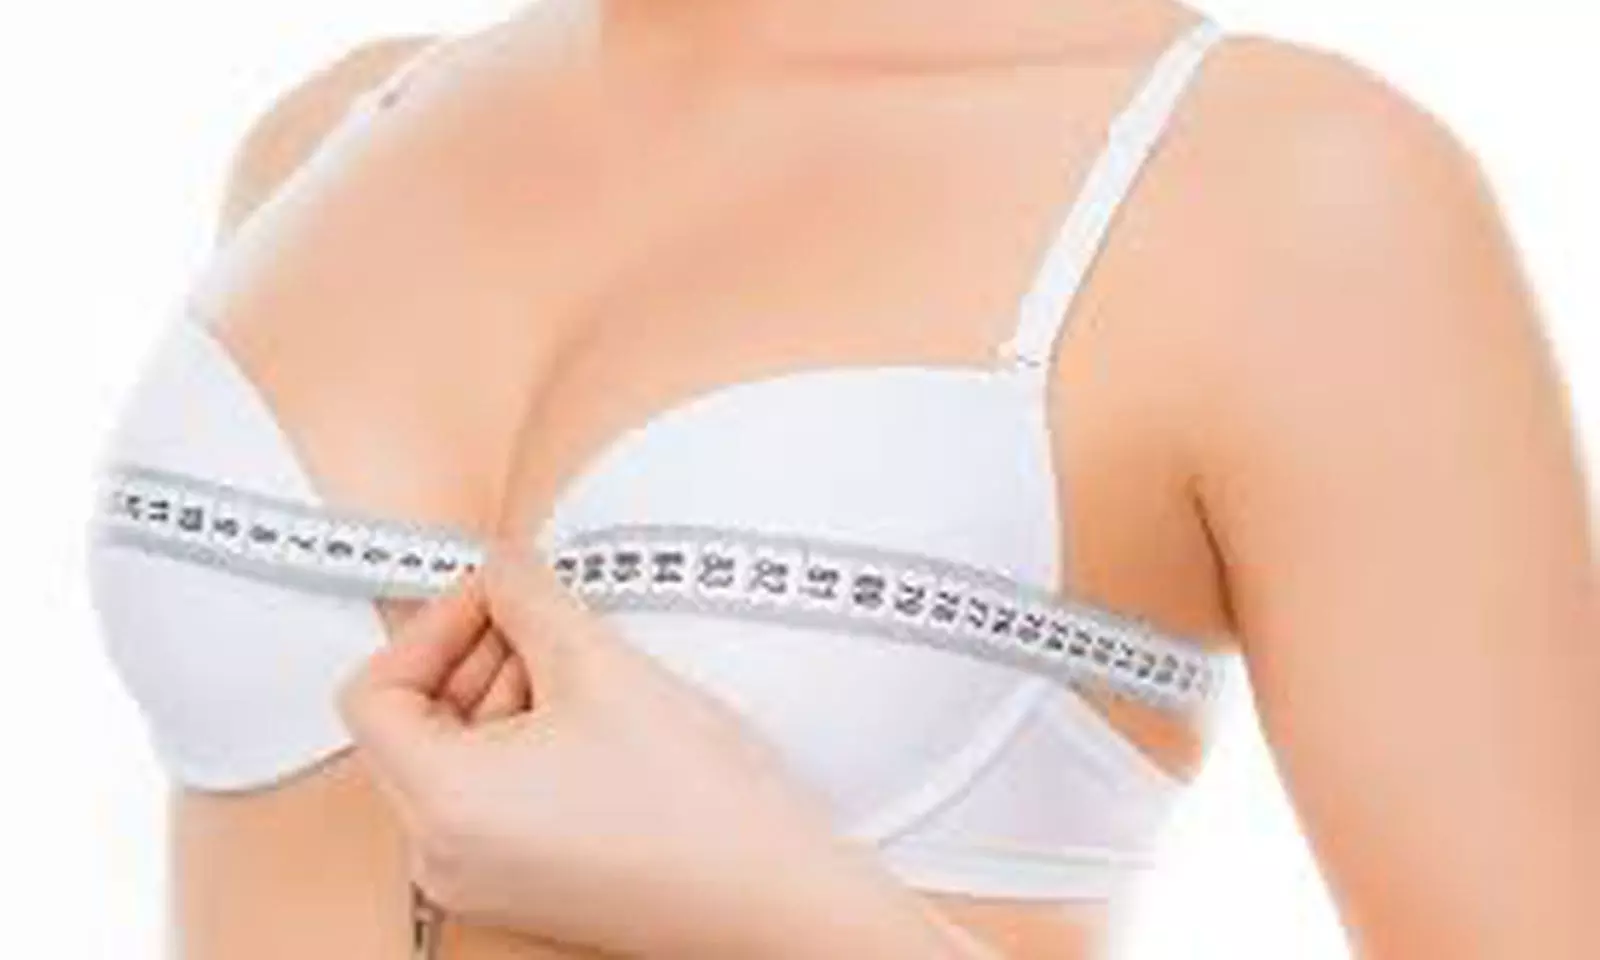 Aesthetic outcomes of implant-based breast reconstruction stay long term: Study